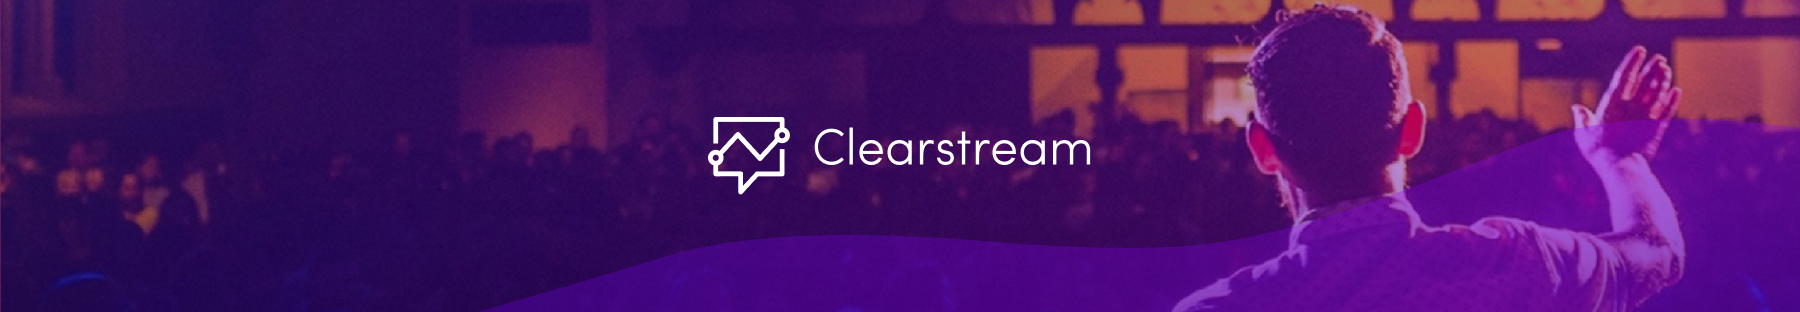 Clearstream: A Texting and Shortcode Service for Churches